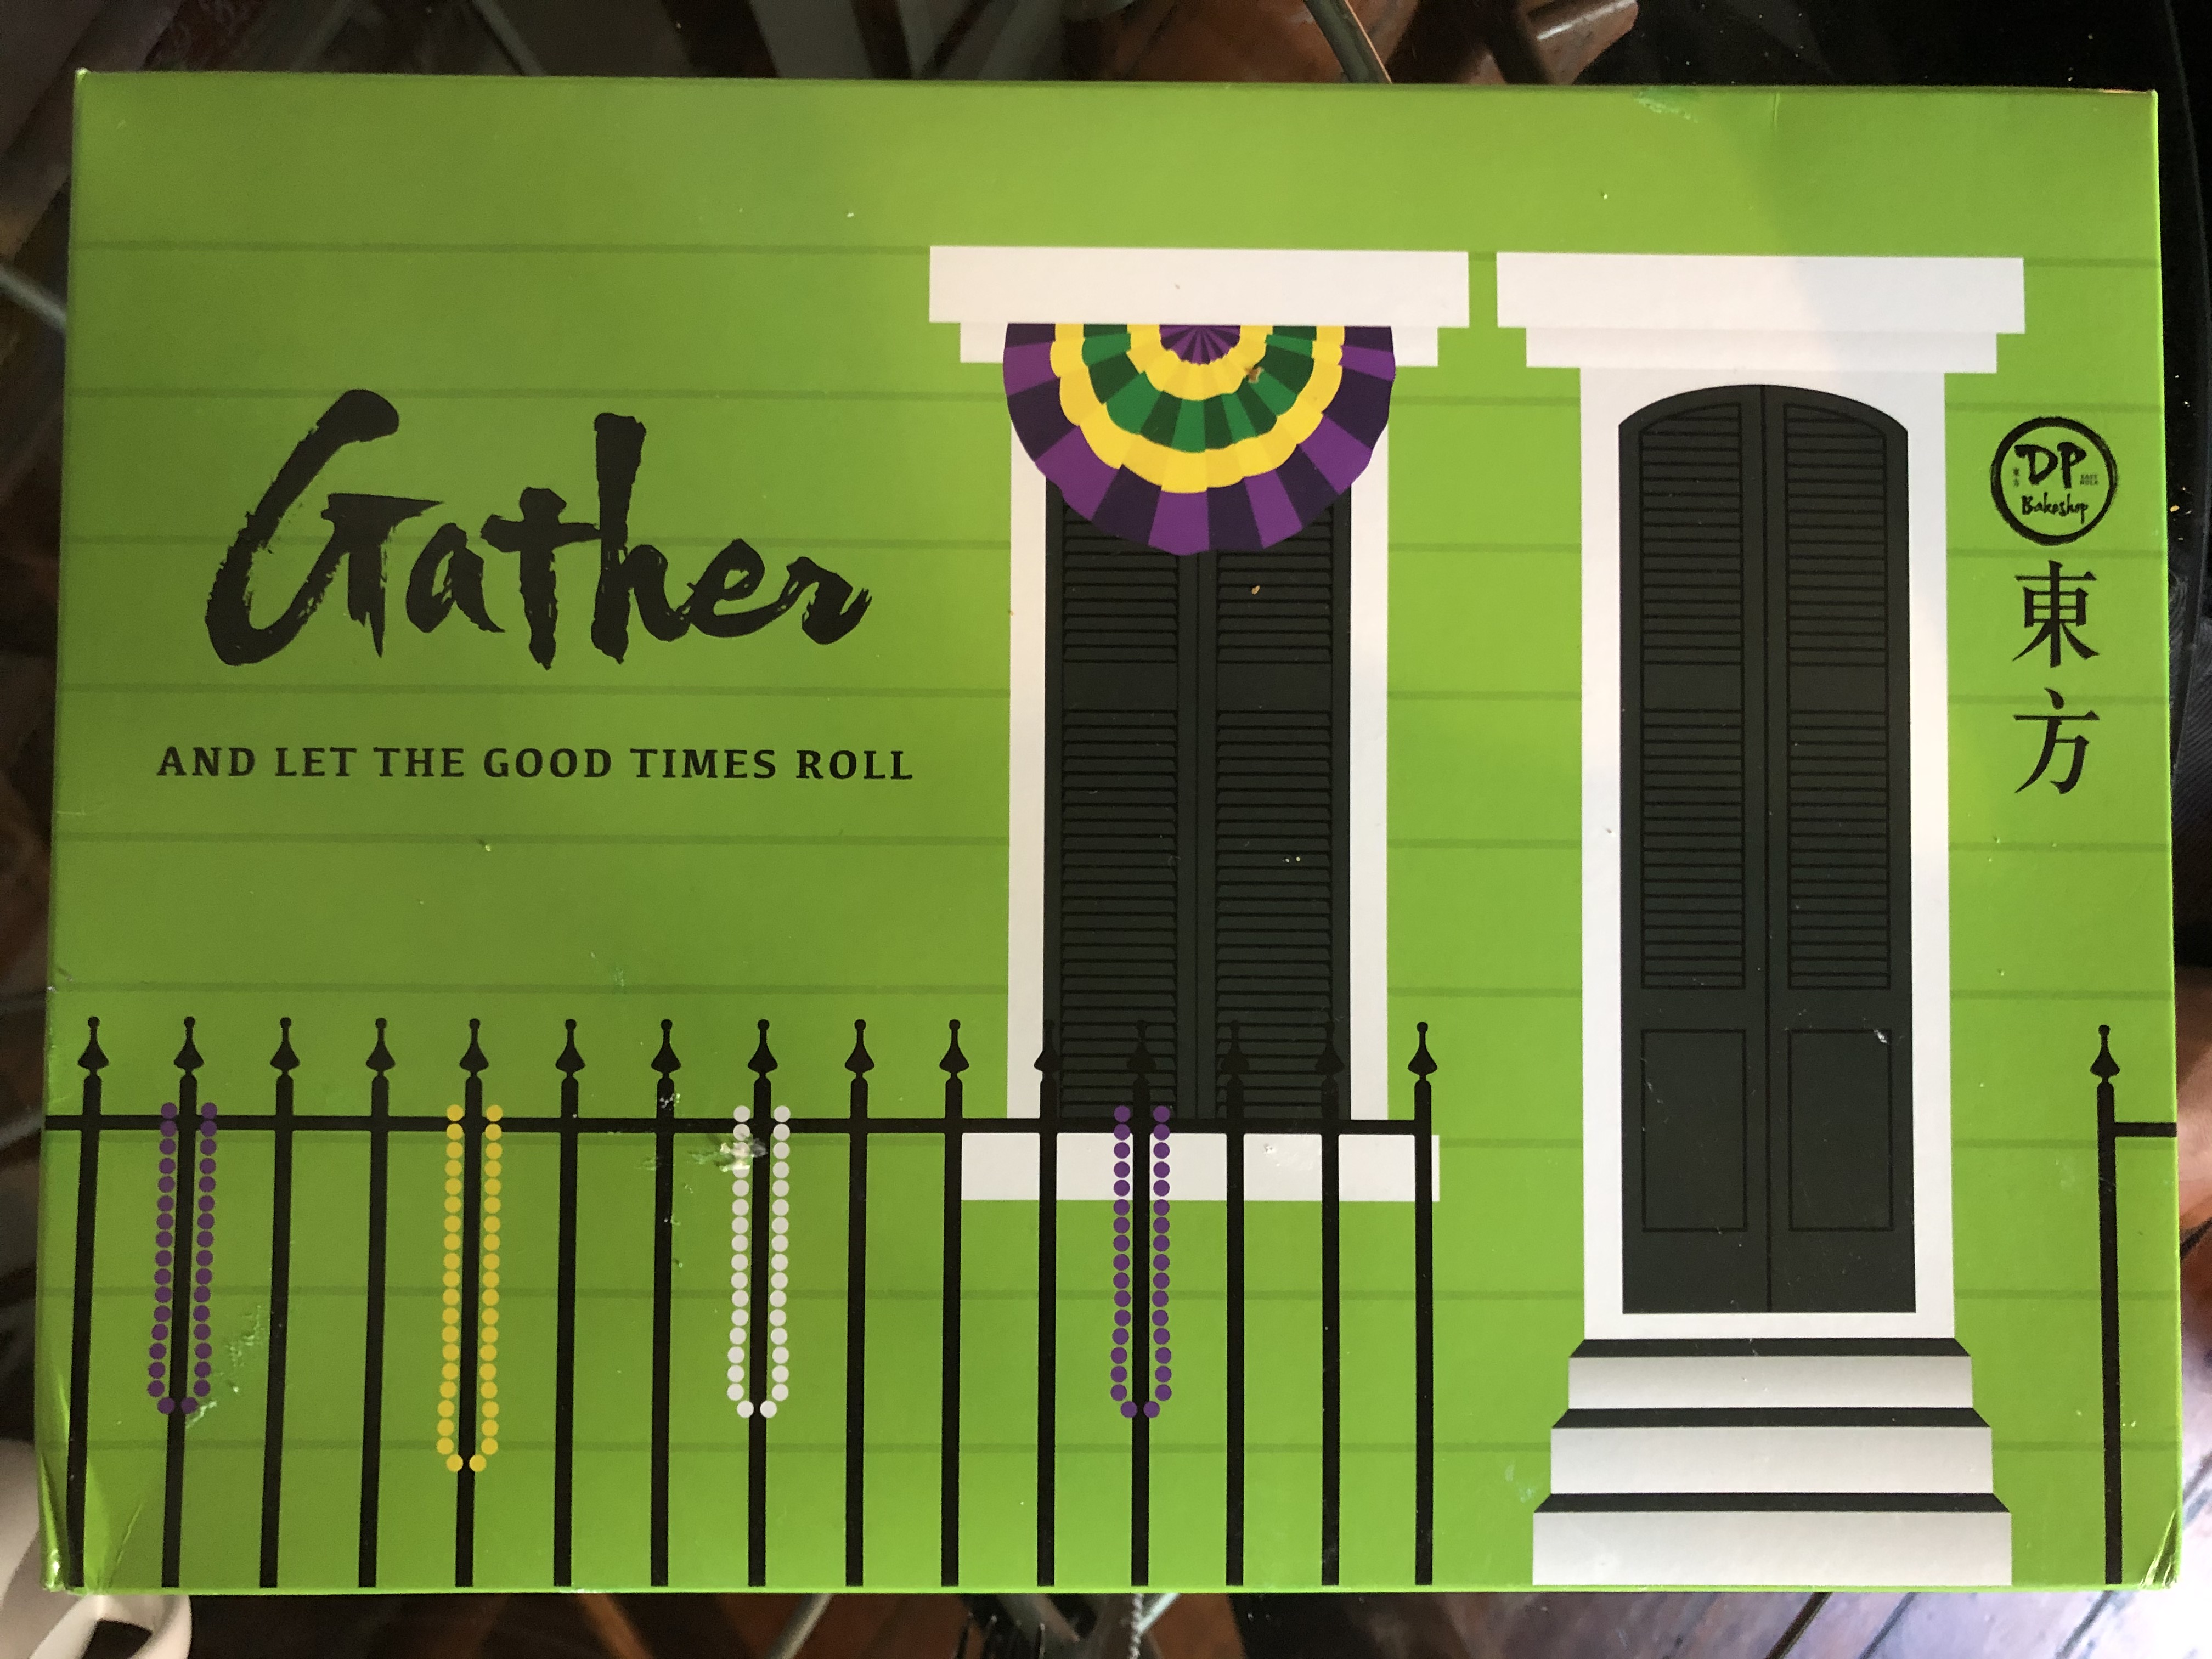 Lime-green box printed with a New Orleans–style house with Mardi Gras beads hanging from an iron fence. Text reads “Gather and let the good times roll” in English. By the house door is a DP Bakery logo and Vietnamese script.